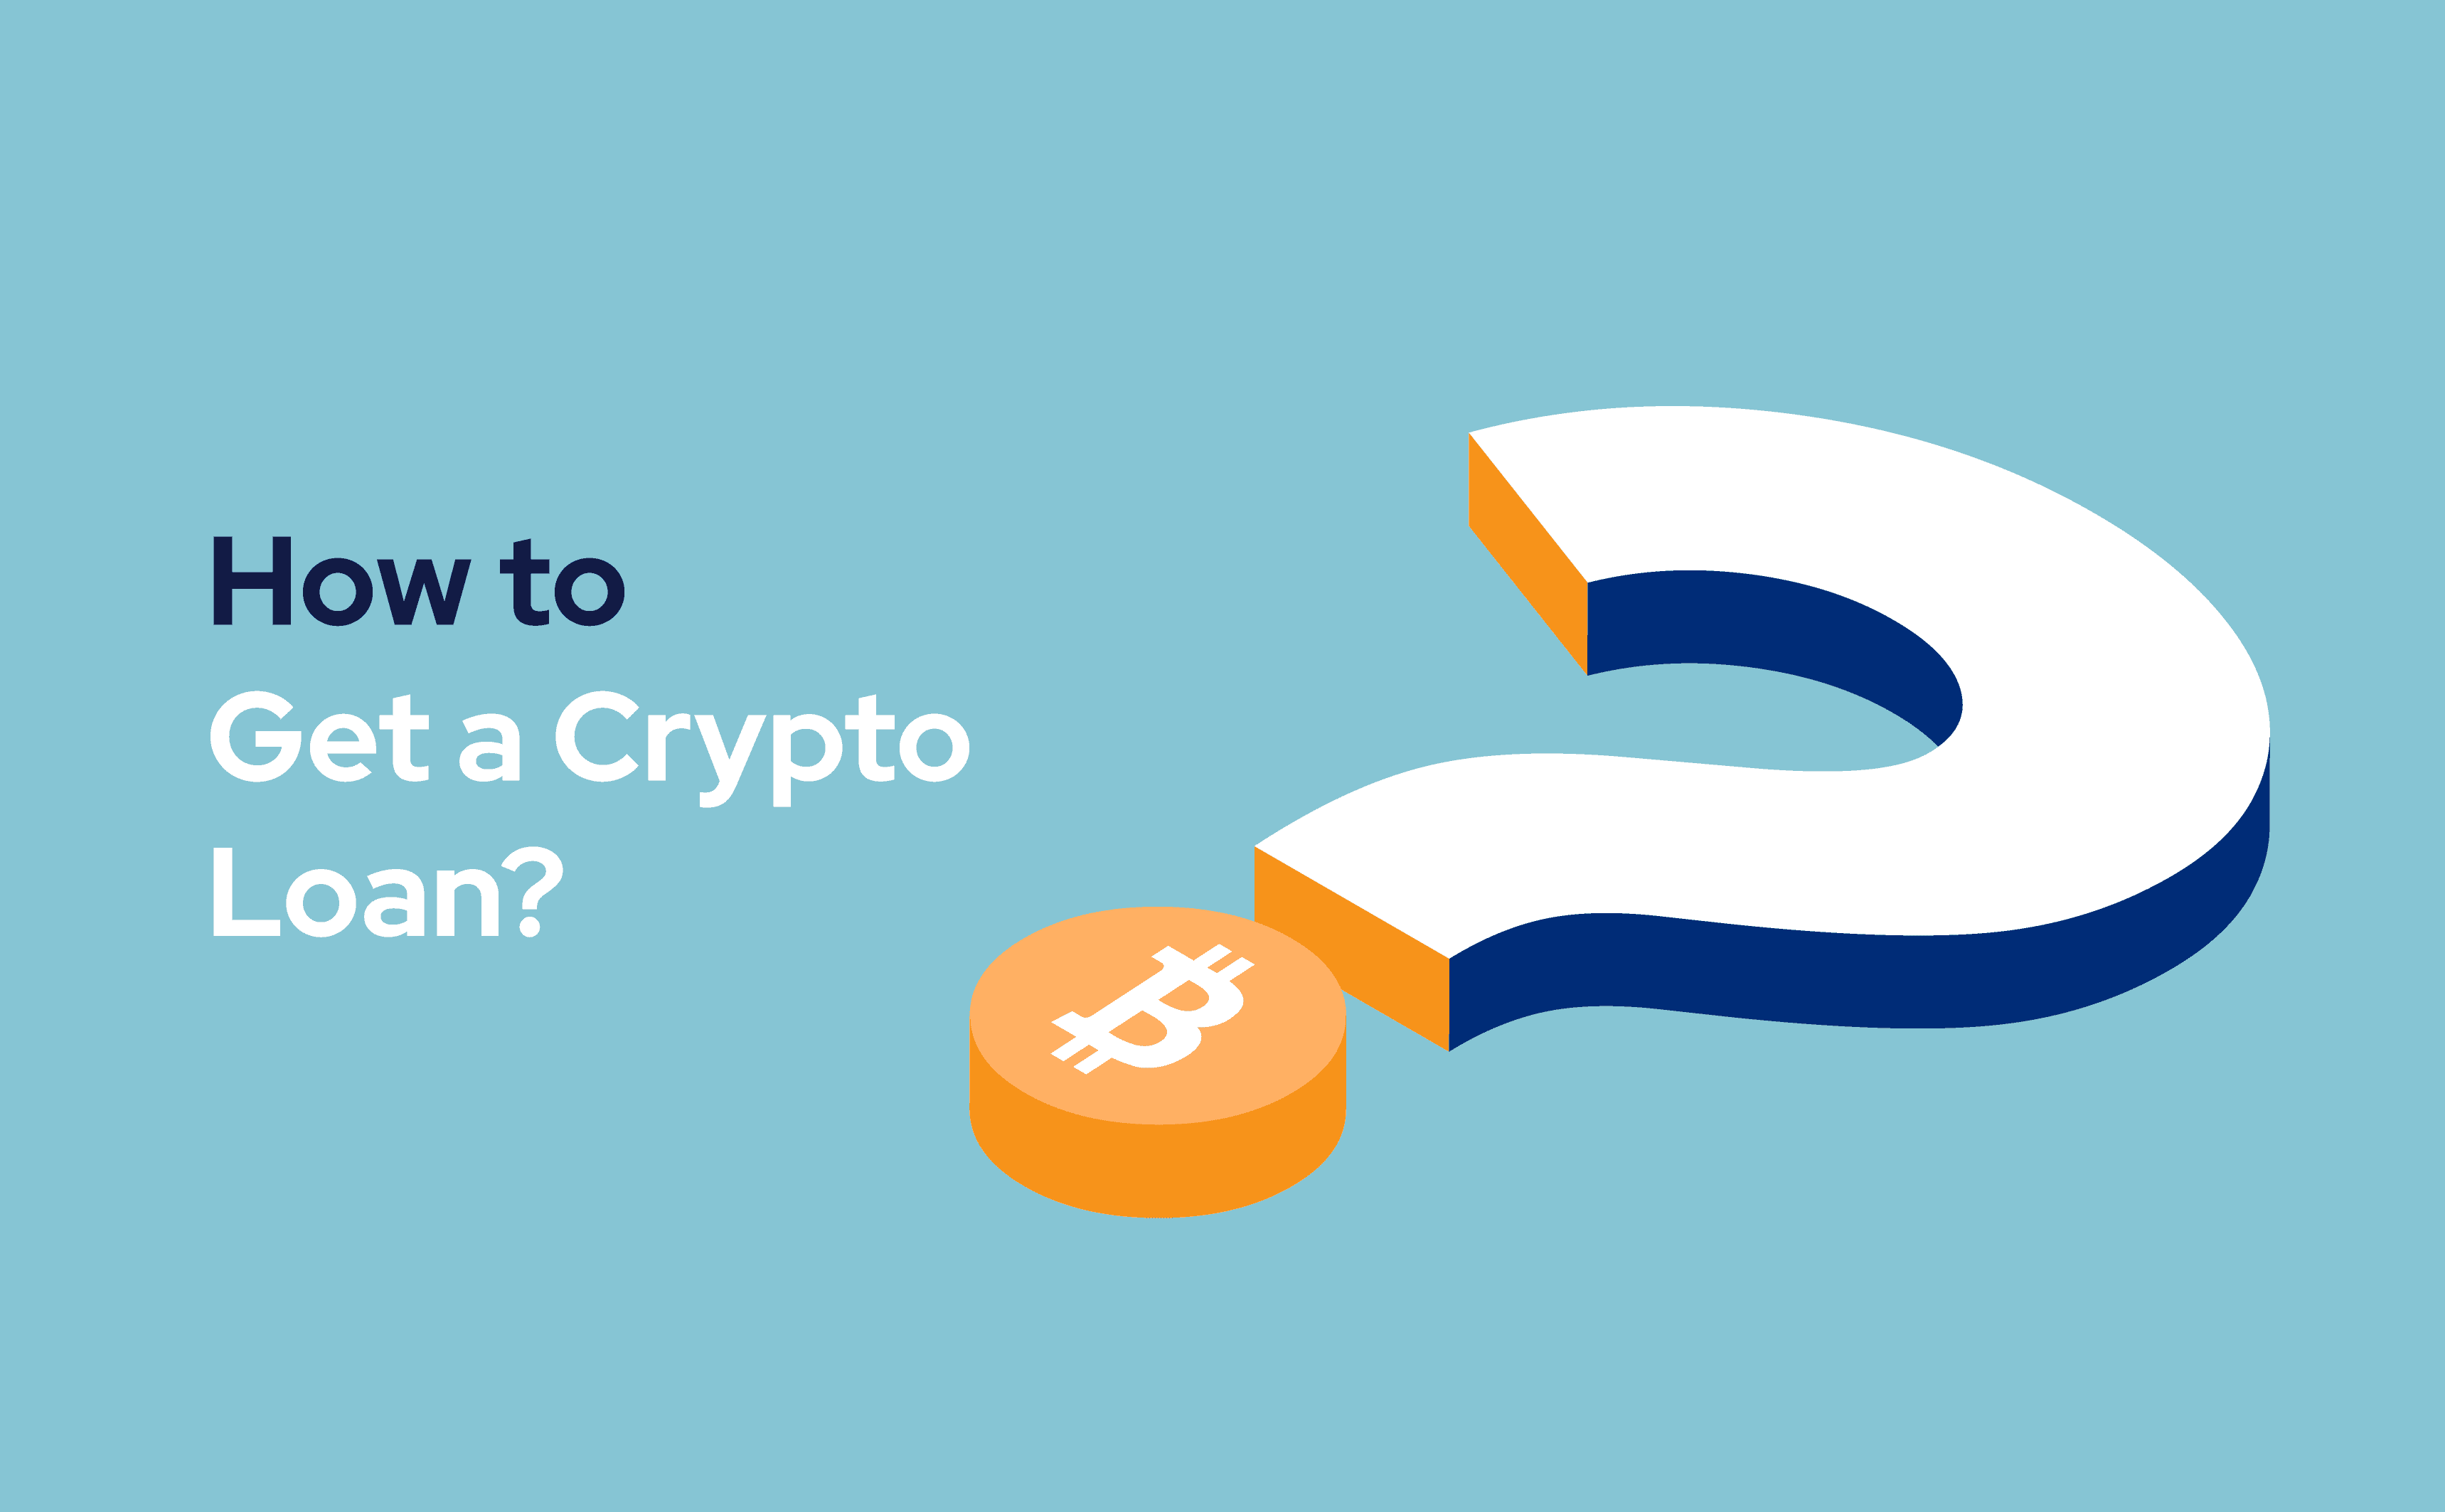 In this blog post, you will find a tutorial on getting a crypto-backed loan at SpectroCoin.